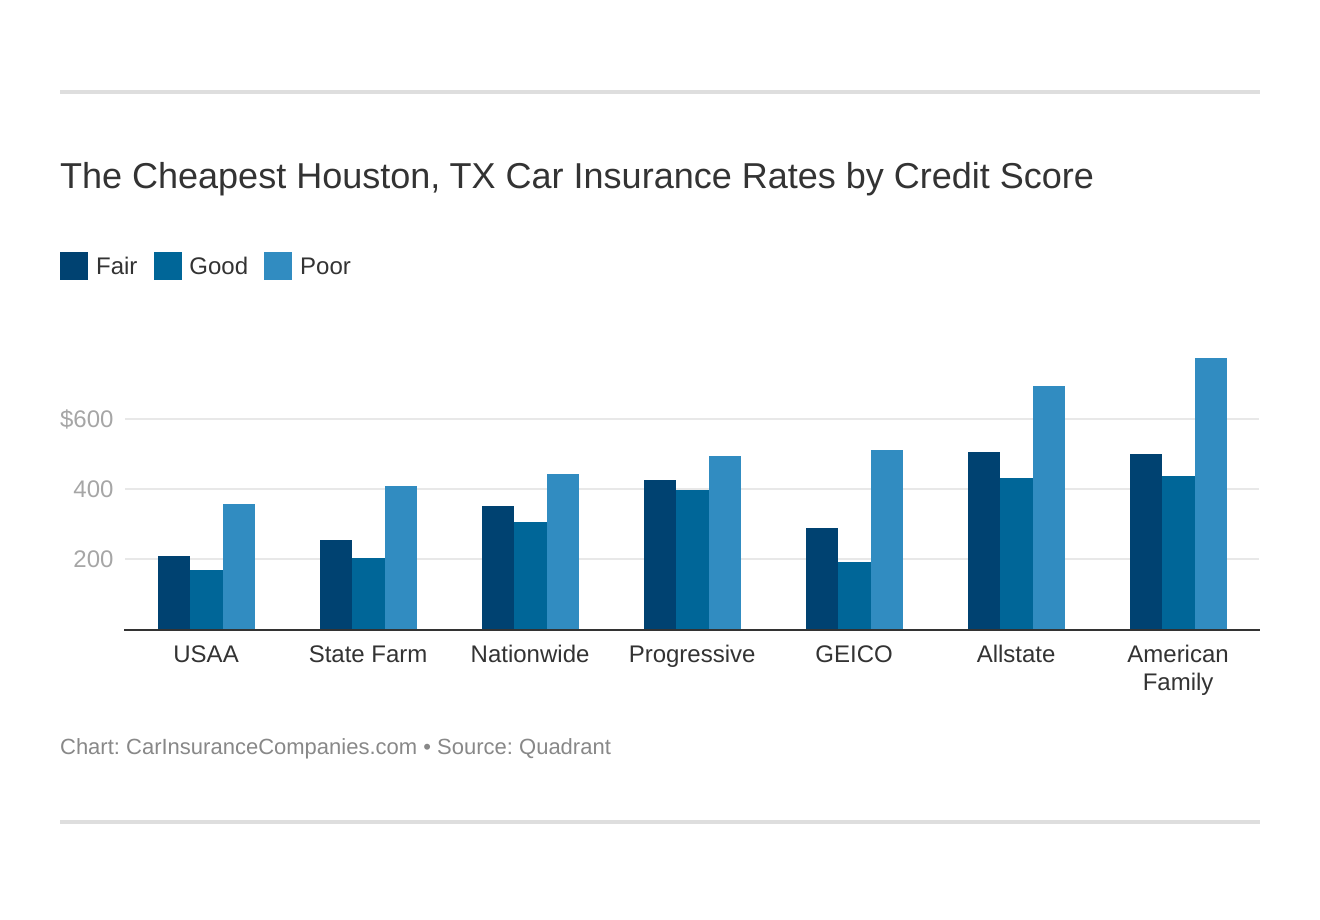 The Cheapest Houston, TX Car Insurance Rates by Credit Score